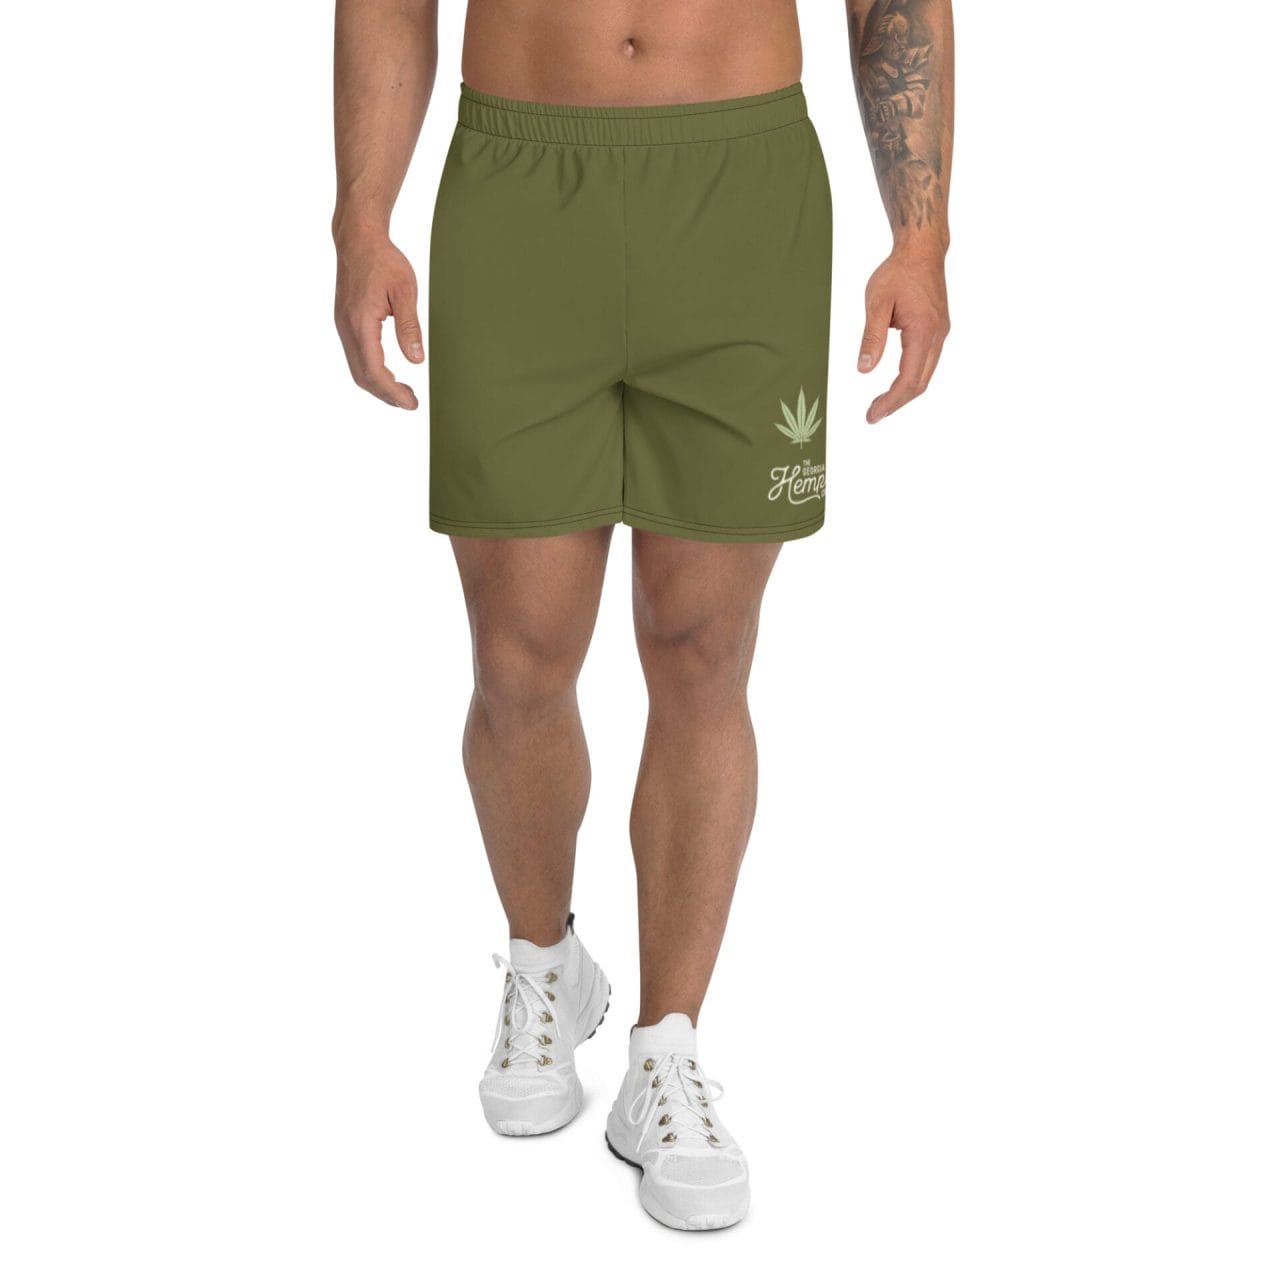 GHC "Leafy Green" Men's Athletic Long Shorts